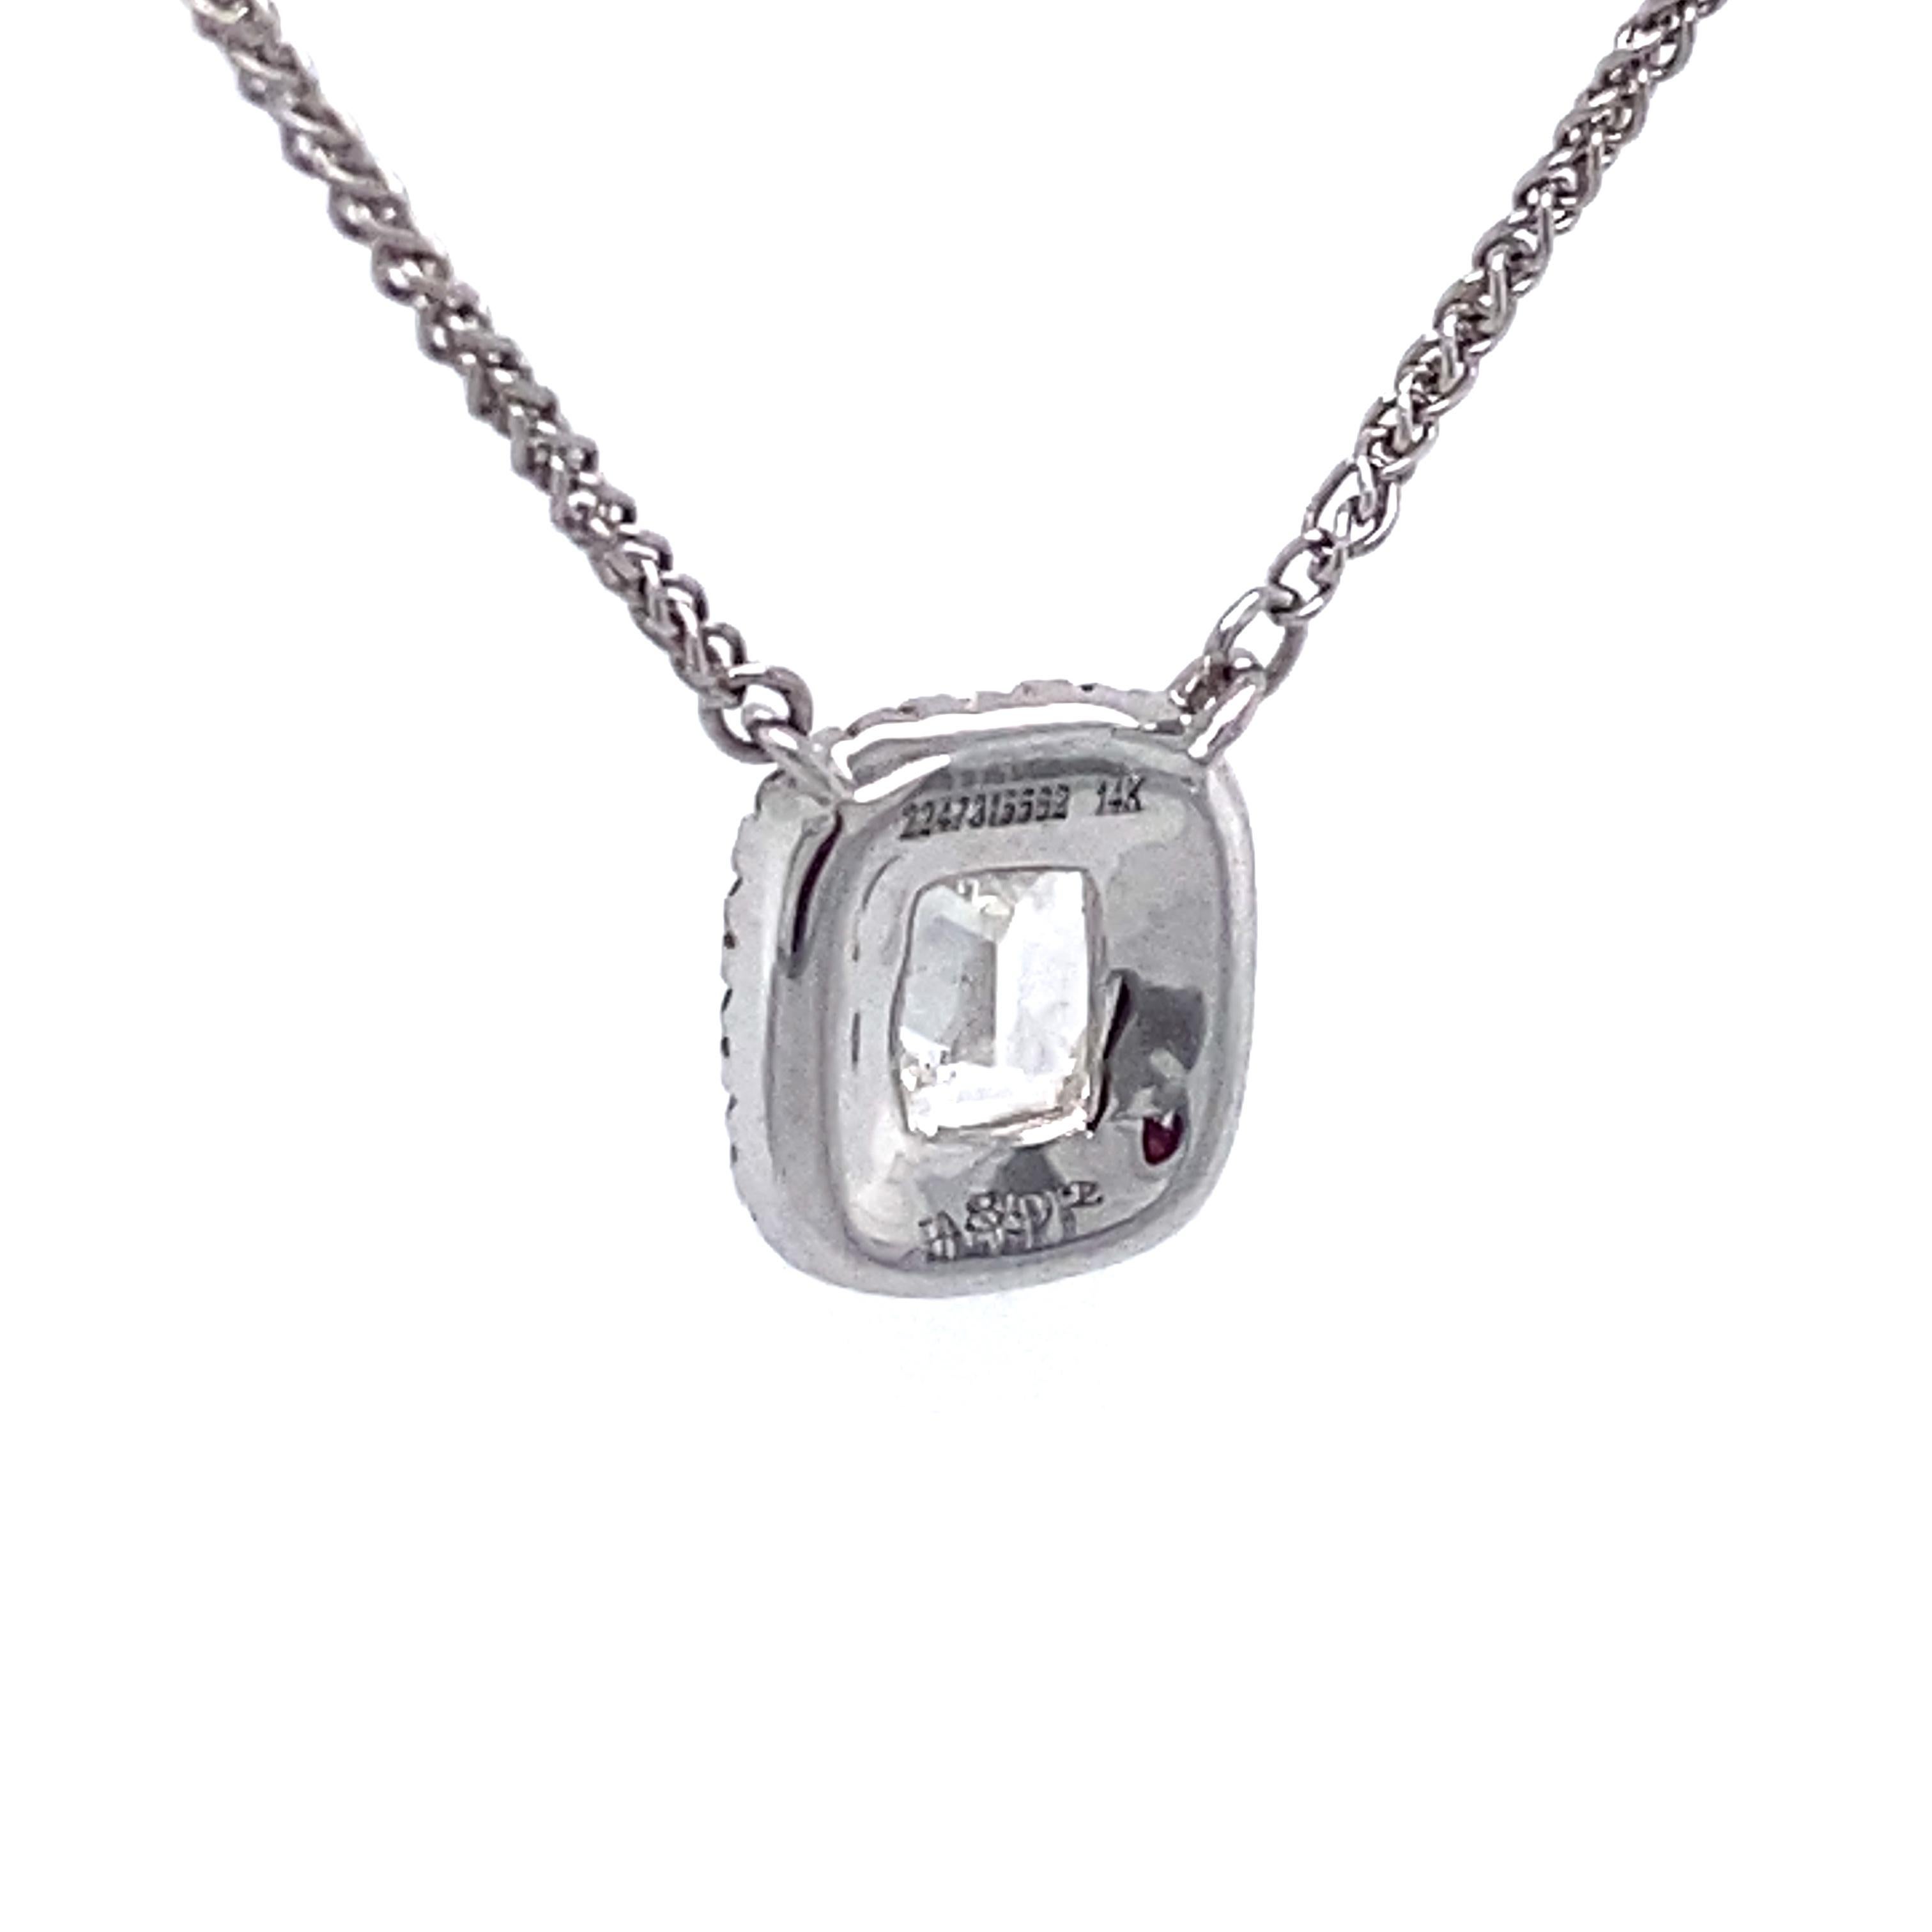 Circa: 2000s
Metal Type: 14 Karat White Gold
Weight: 3 grams
Dimensions: 18 Inch Length (necklace)

Diamond Details:

Carat: 0.51 carats
Shape: Cushion cut
Color: I
Clarity: VS2
Certification: GIA #2247315562